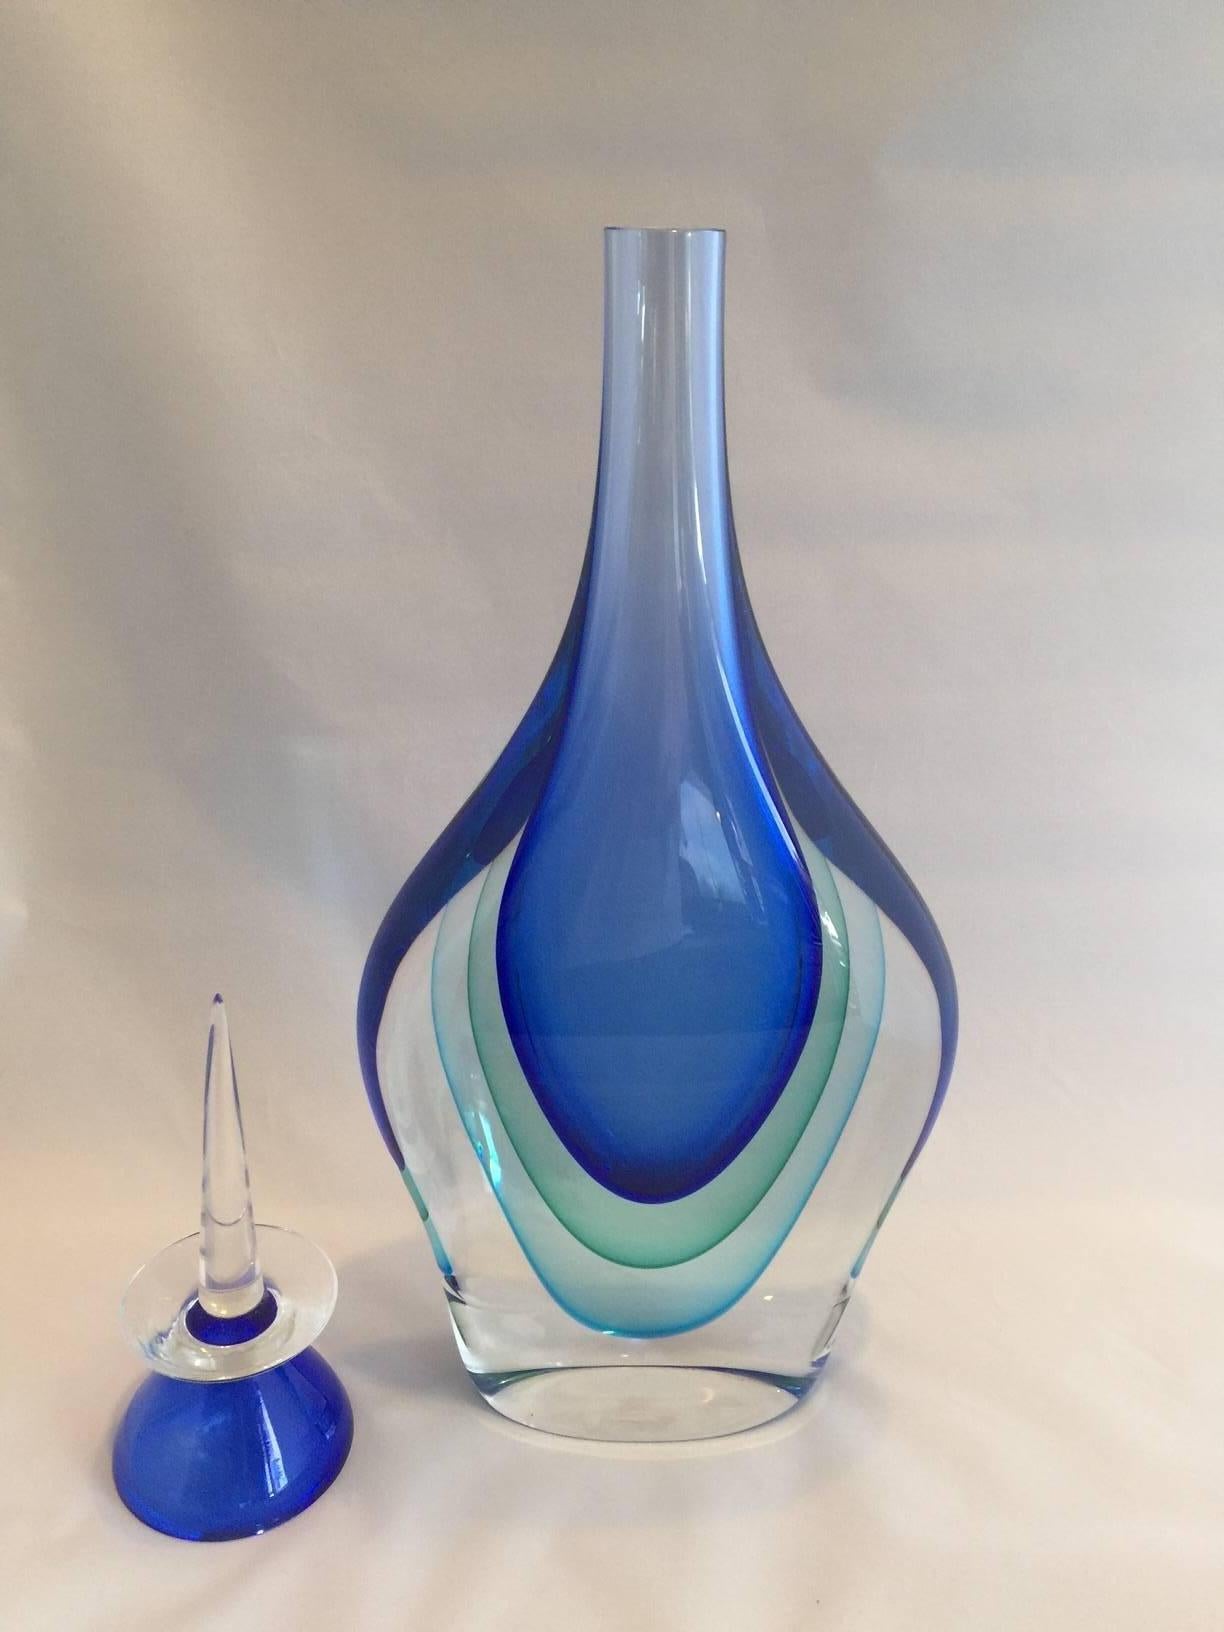 Gorgeous Murano handblown multi-Sommerso blue and green art glass decanter with topper. Created and signed by renowned Murano artist Luigi Onesto.